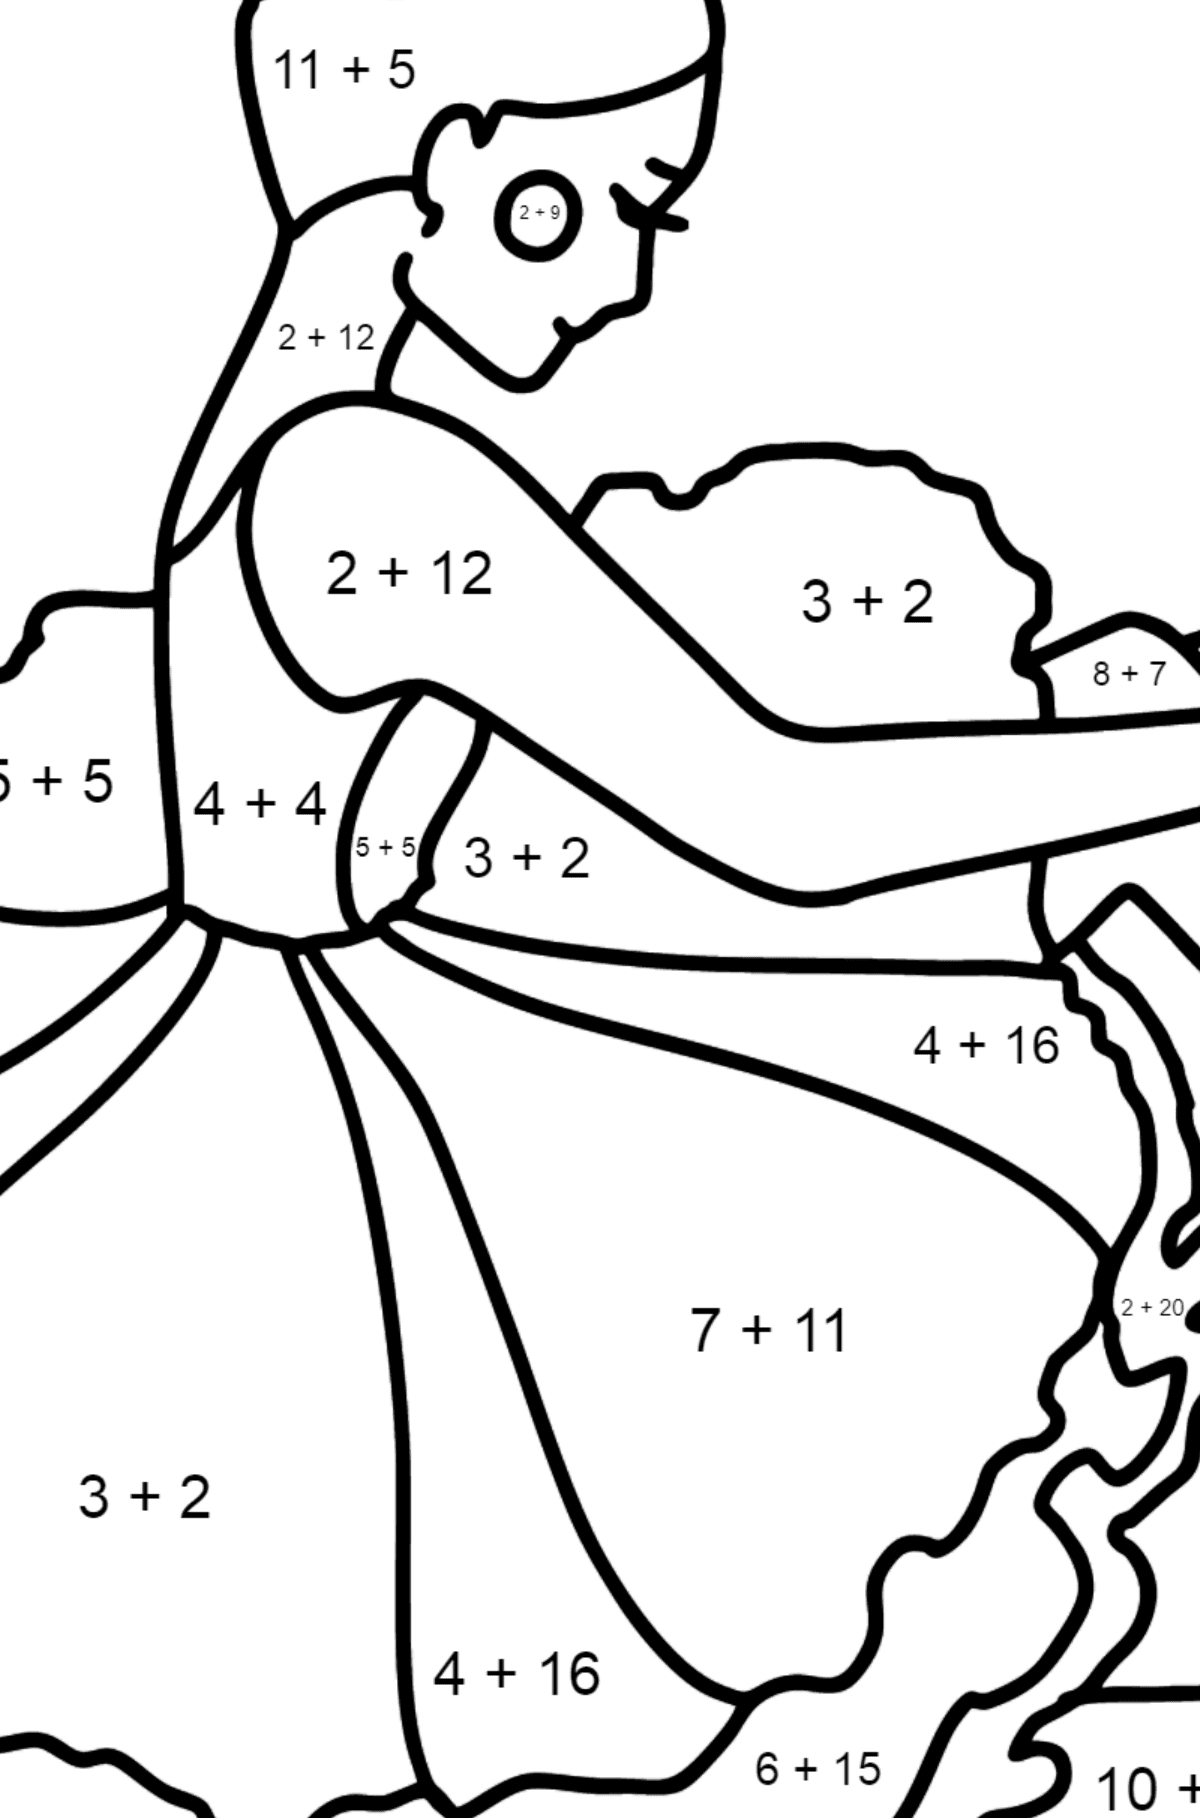 Ballerina in a Lush Dress coloring page - Math Coloring - Addition for Kids